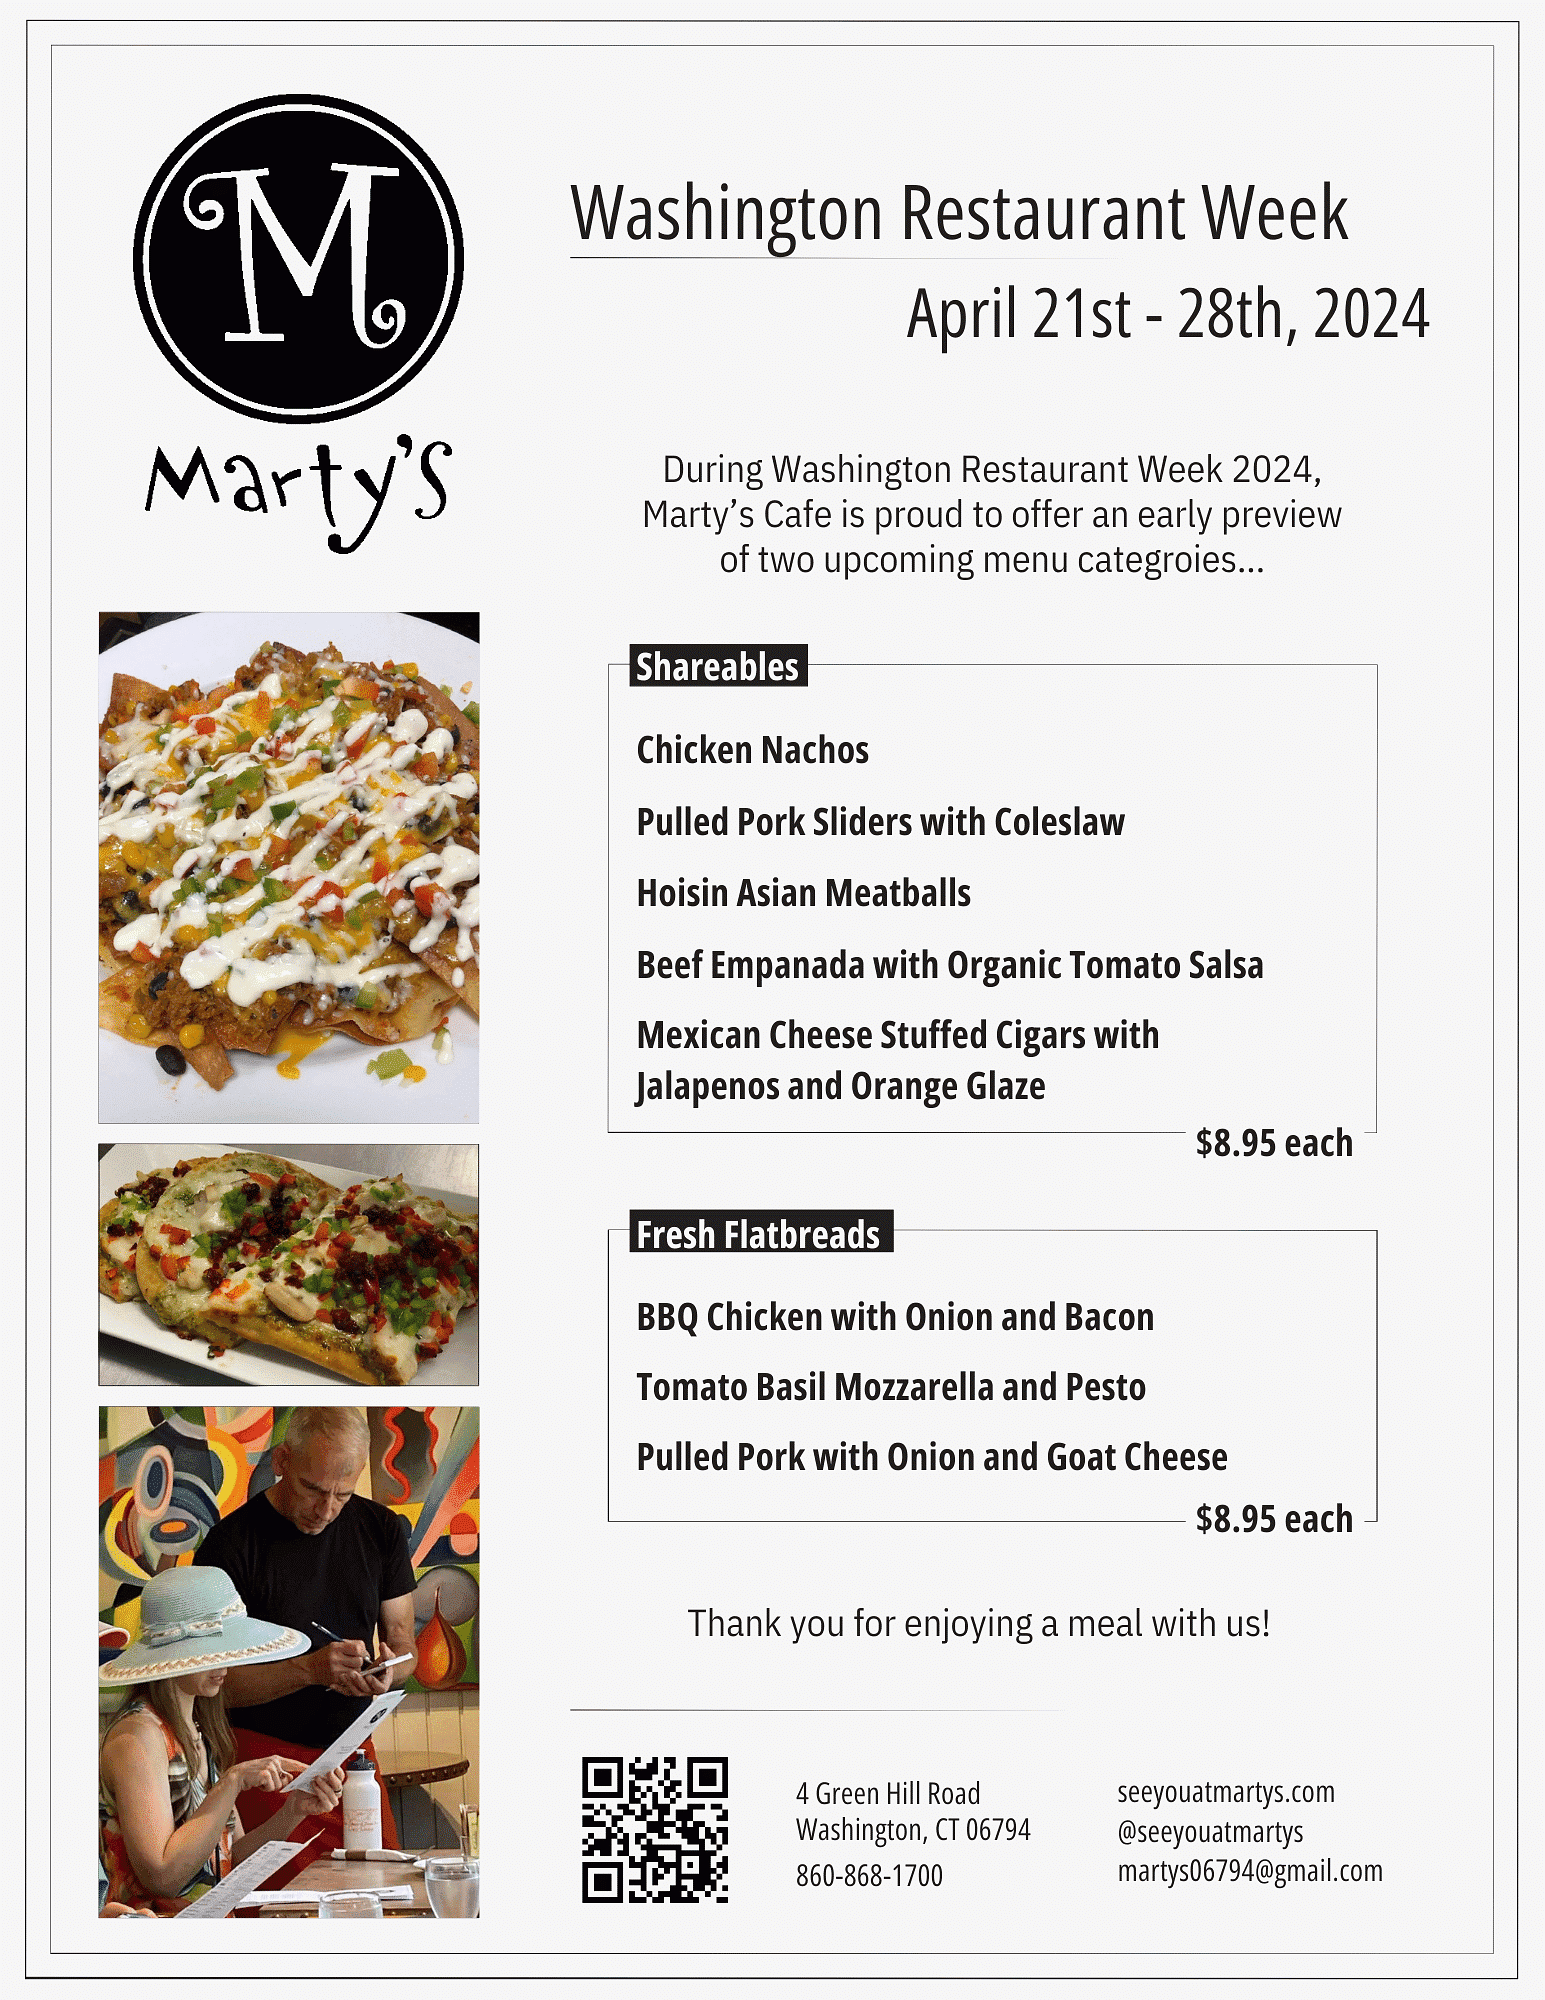 Logo for Marty's Washington Restaurant Week (April 21-28) with menu items and QR code.